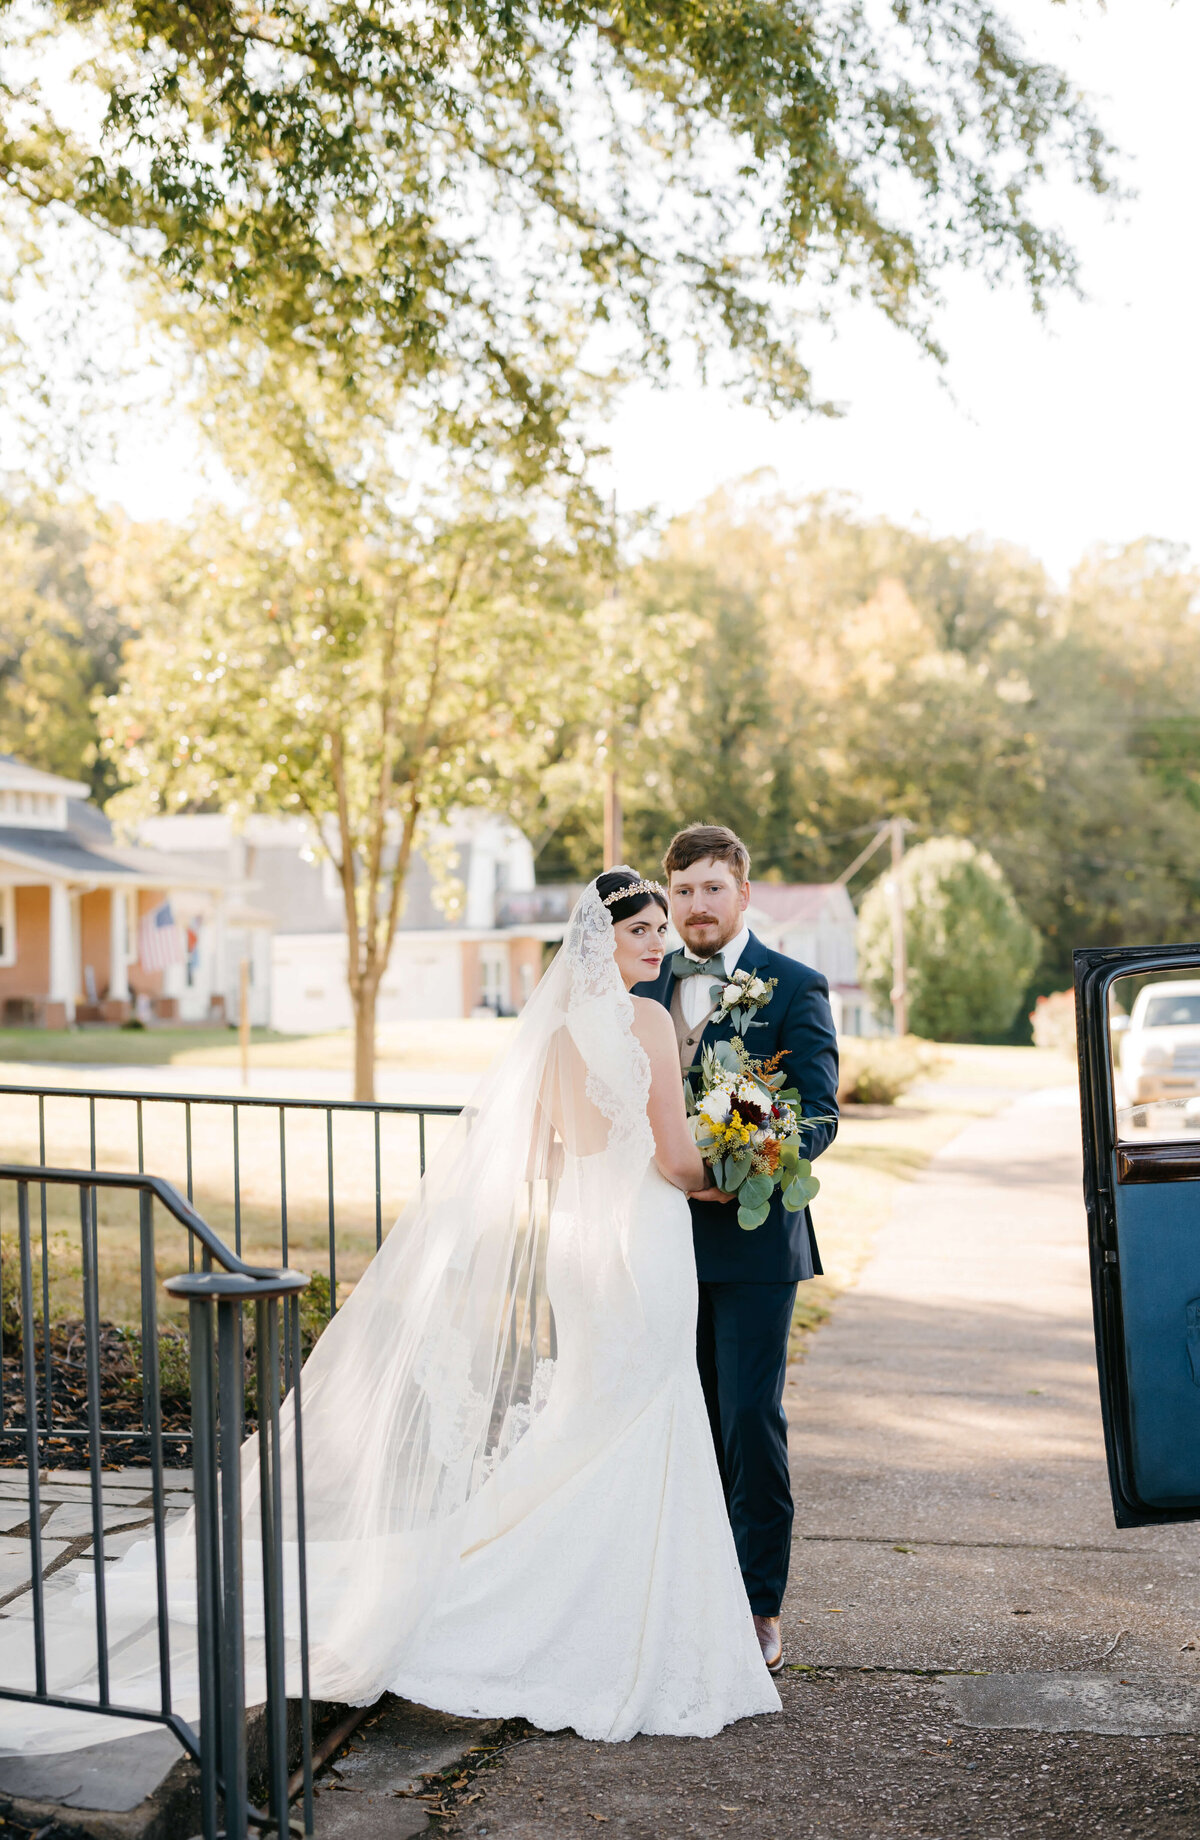 bride and groom on a side walk with their Richmond wedding chapel in the background as the couple embraces before getting into a vintage car that is parked next to them